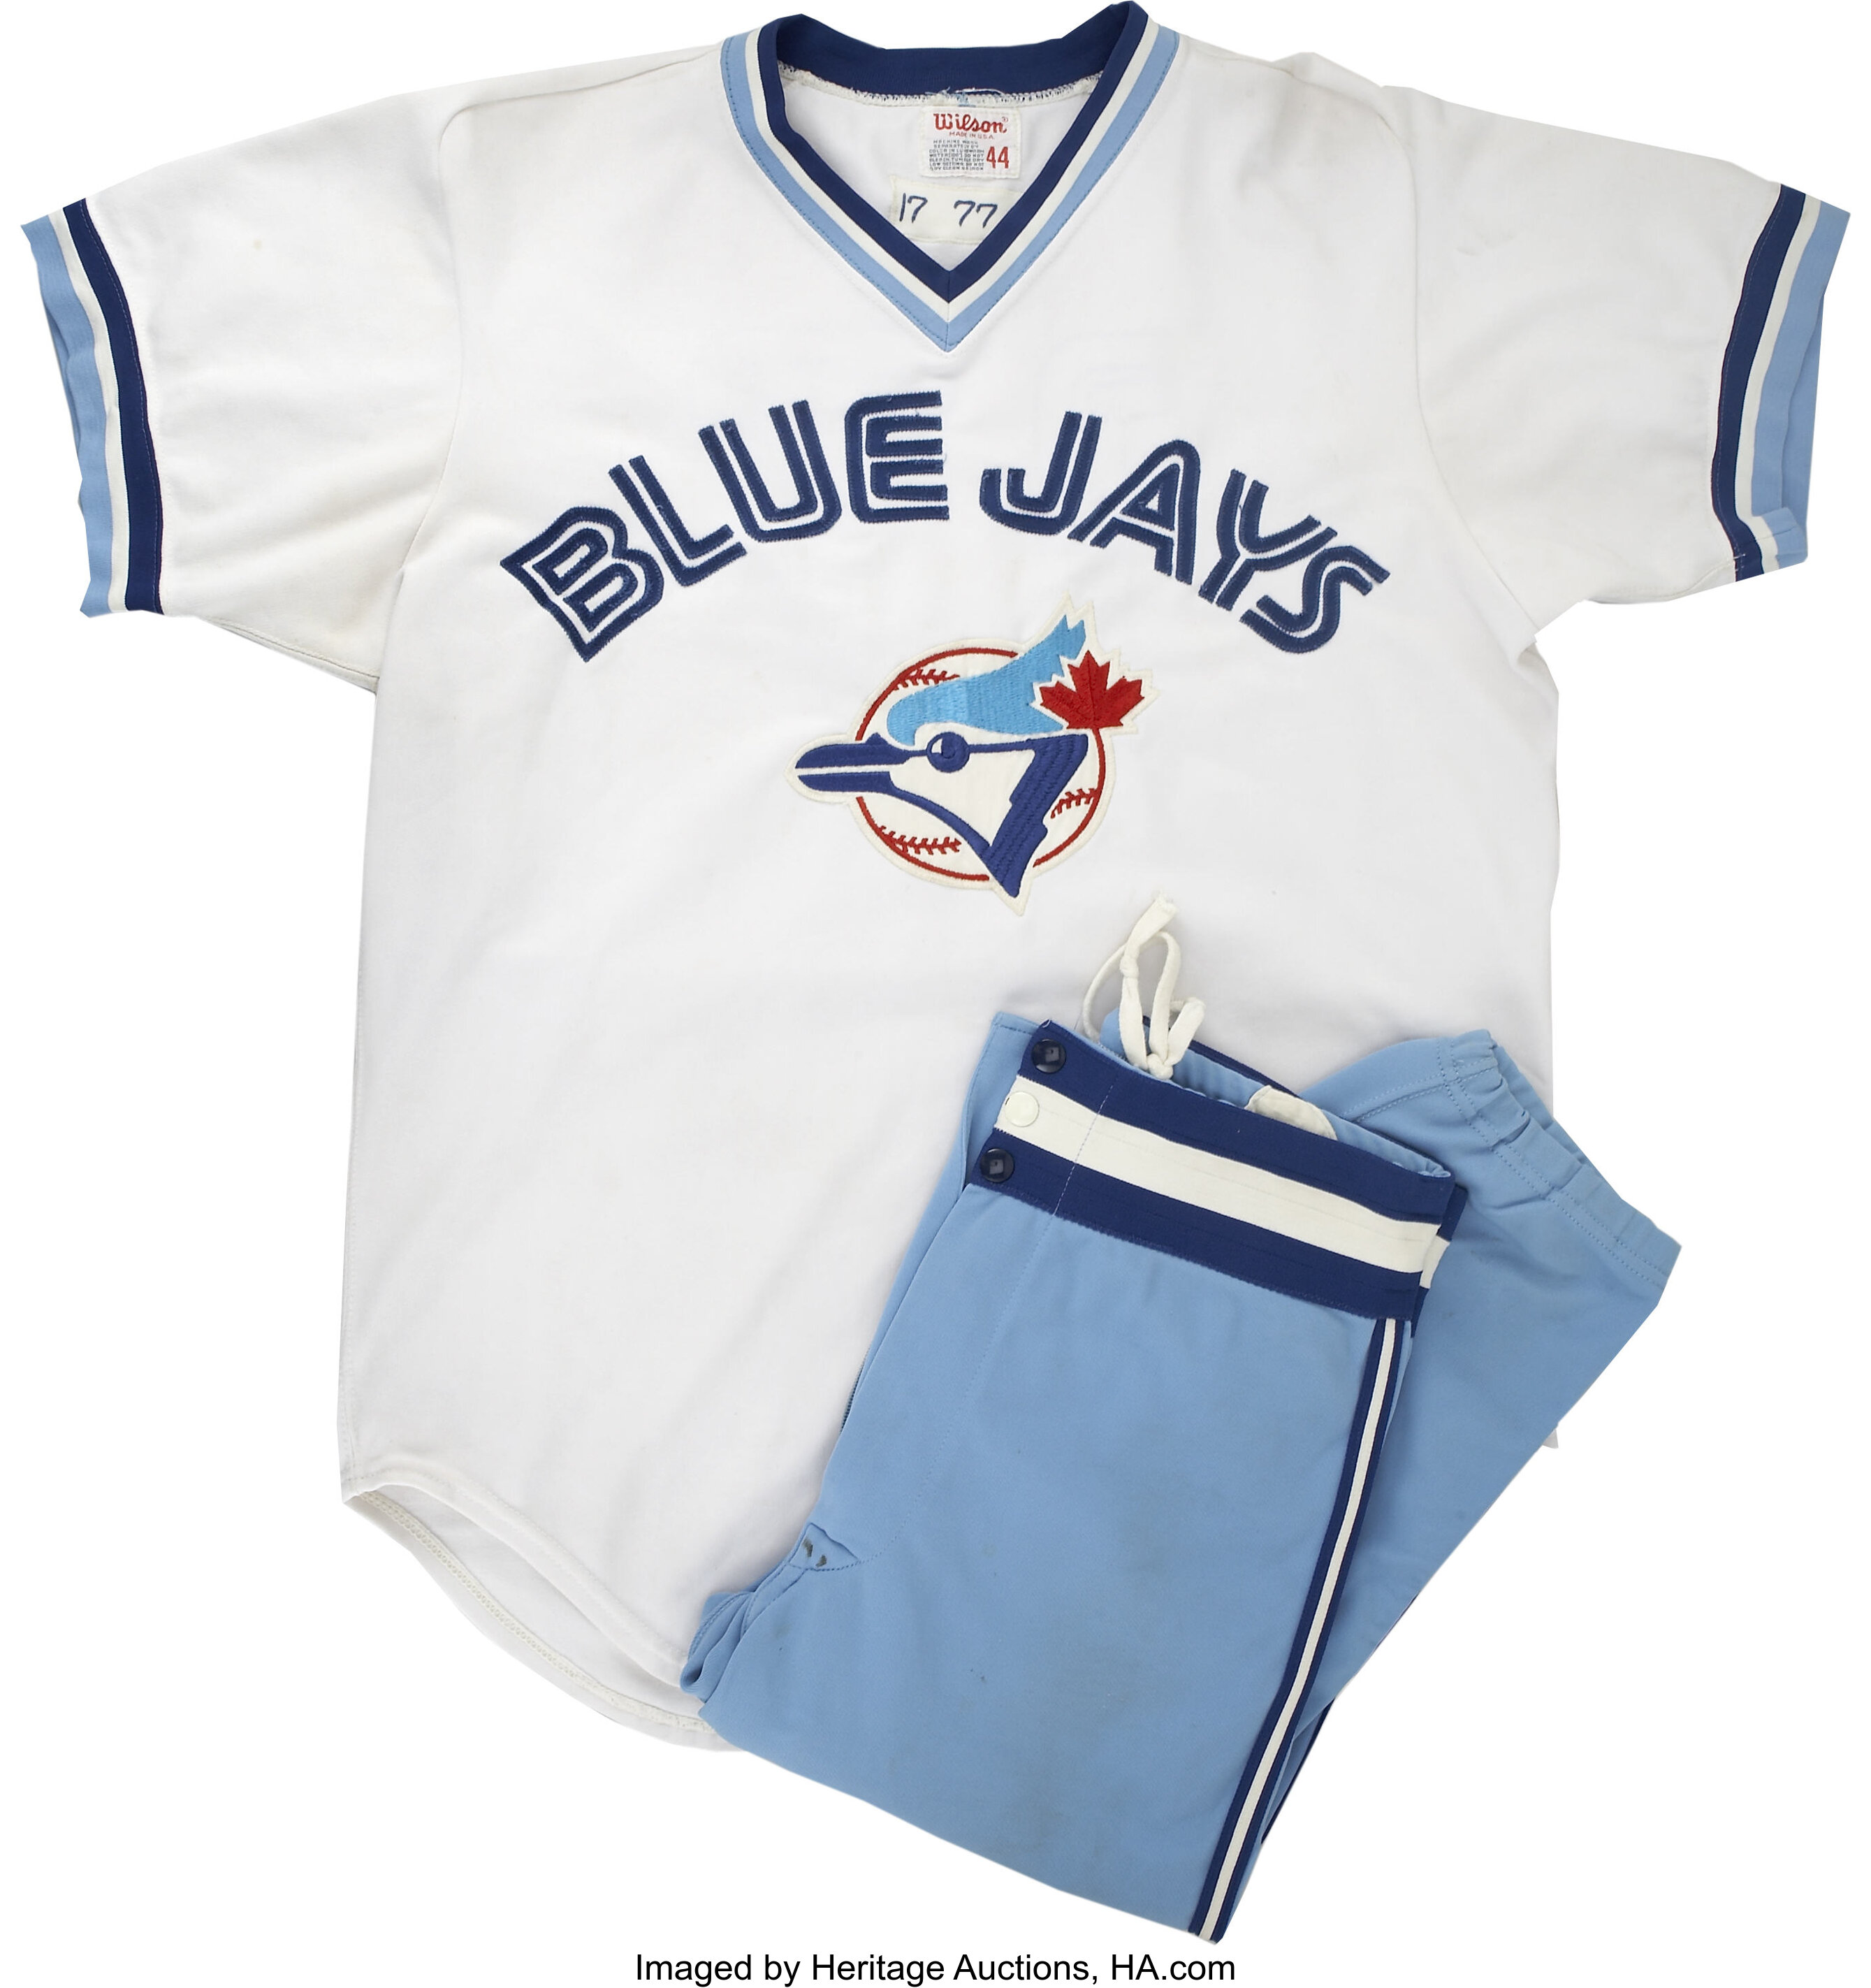 April 7, 1977: Blue Jays play their first ever game